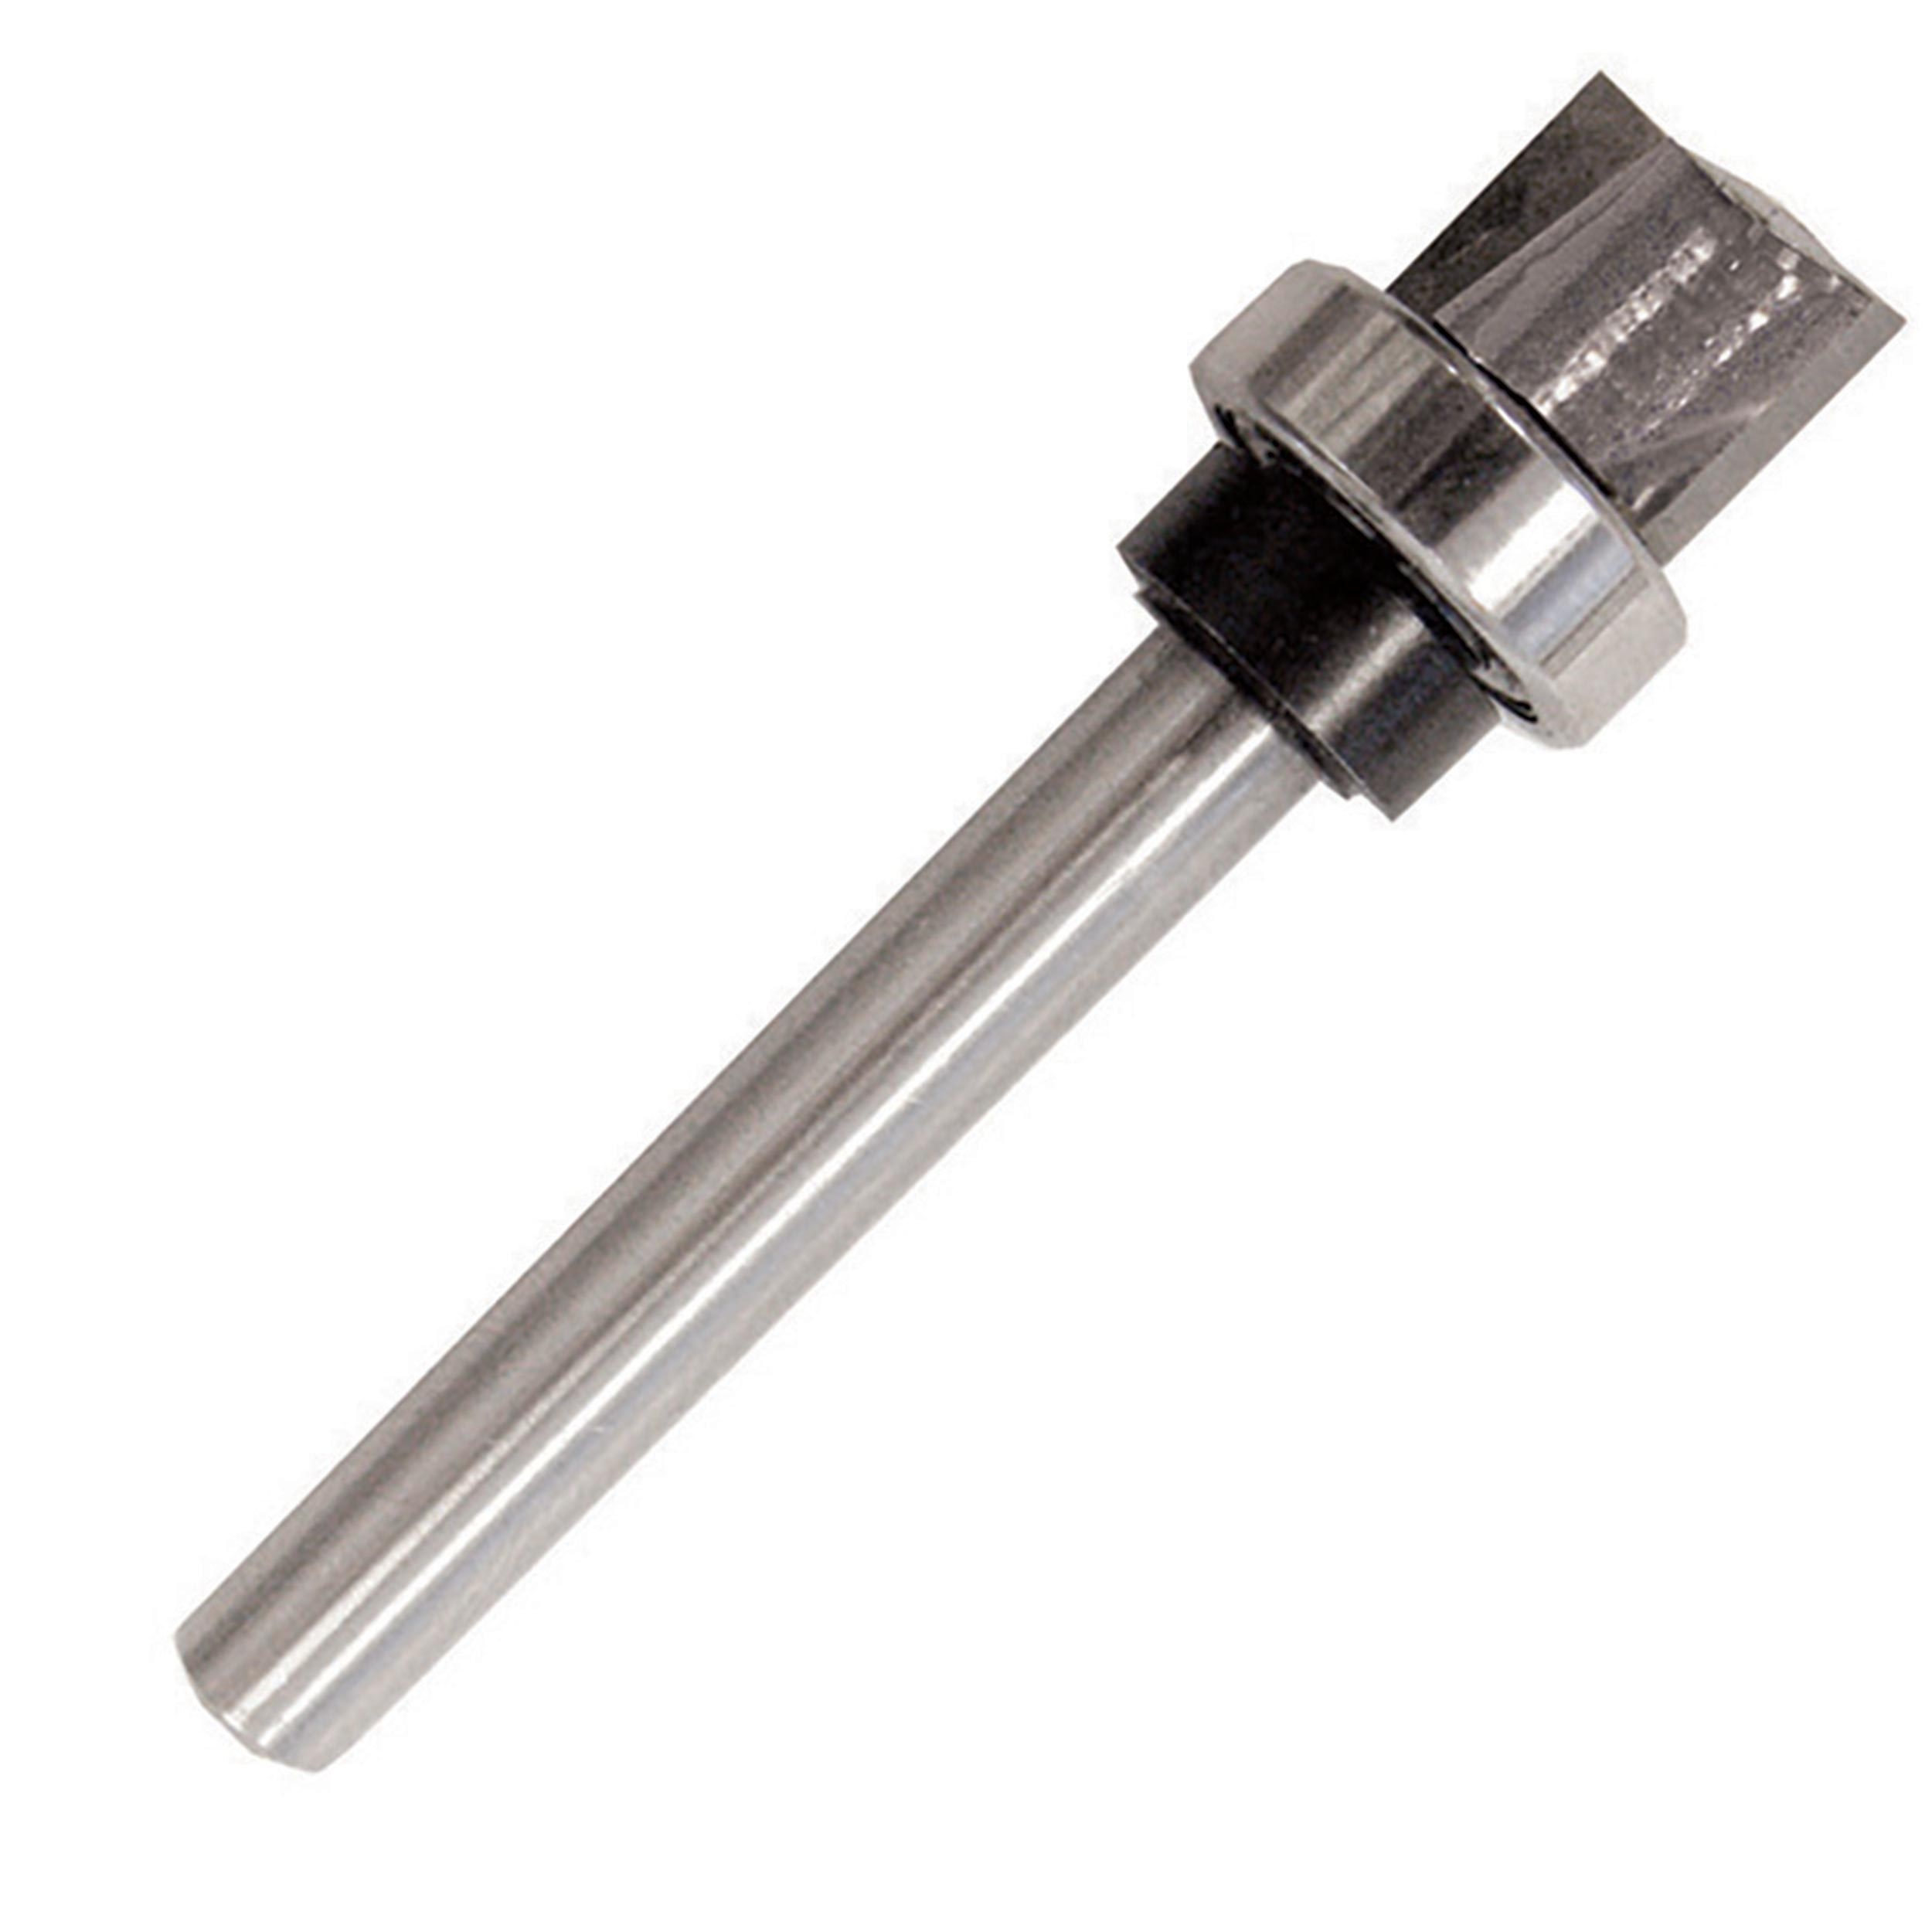 1/2" Straight Router Bit With Bearing